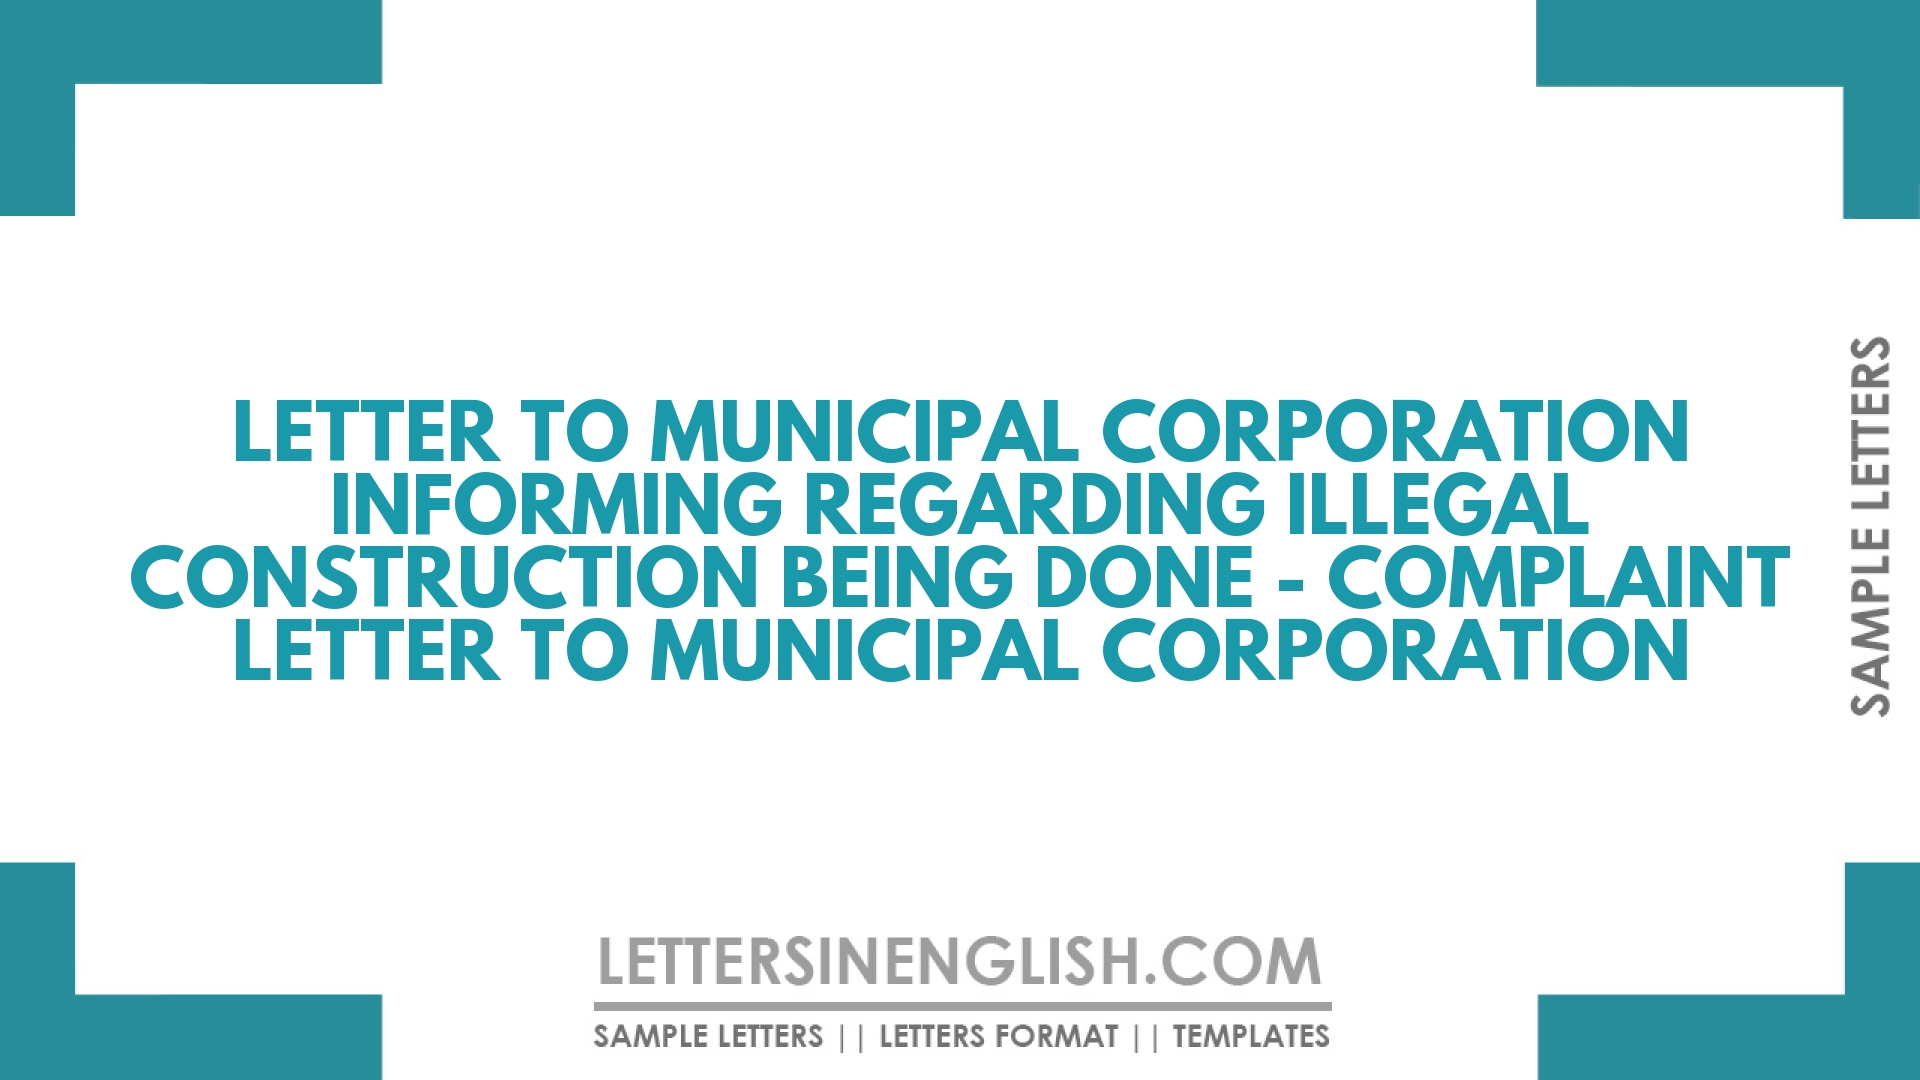 Letter to Municipal Corporation Informing Regarding Illegal Construction Being Done – Complaint Letter to Municipal Corporation